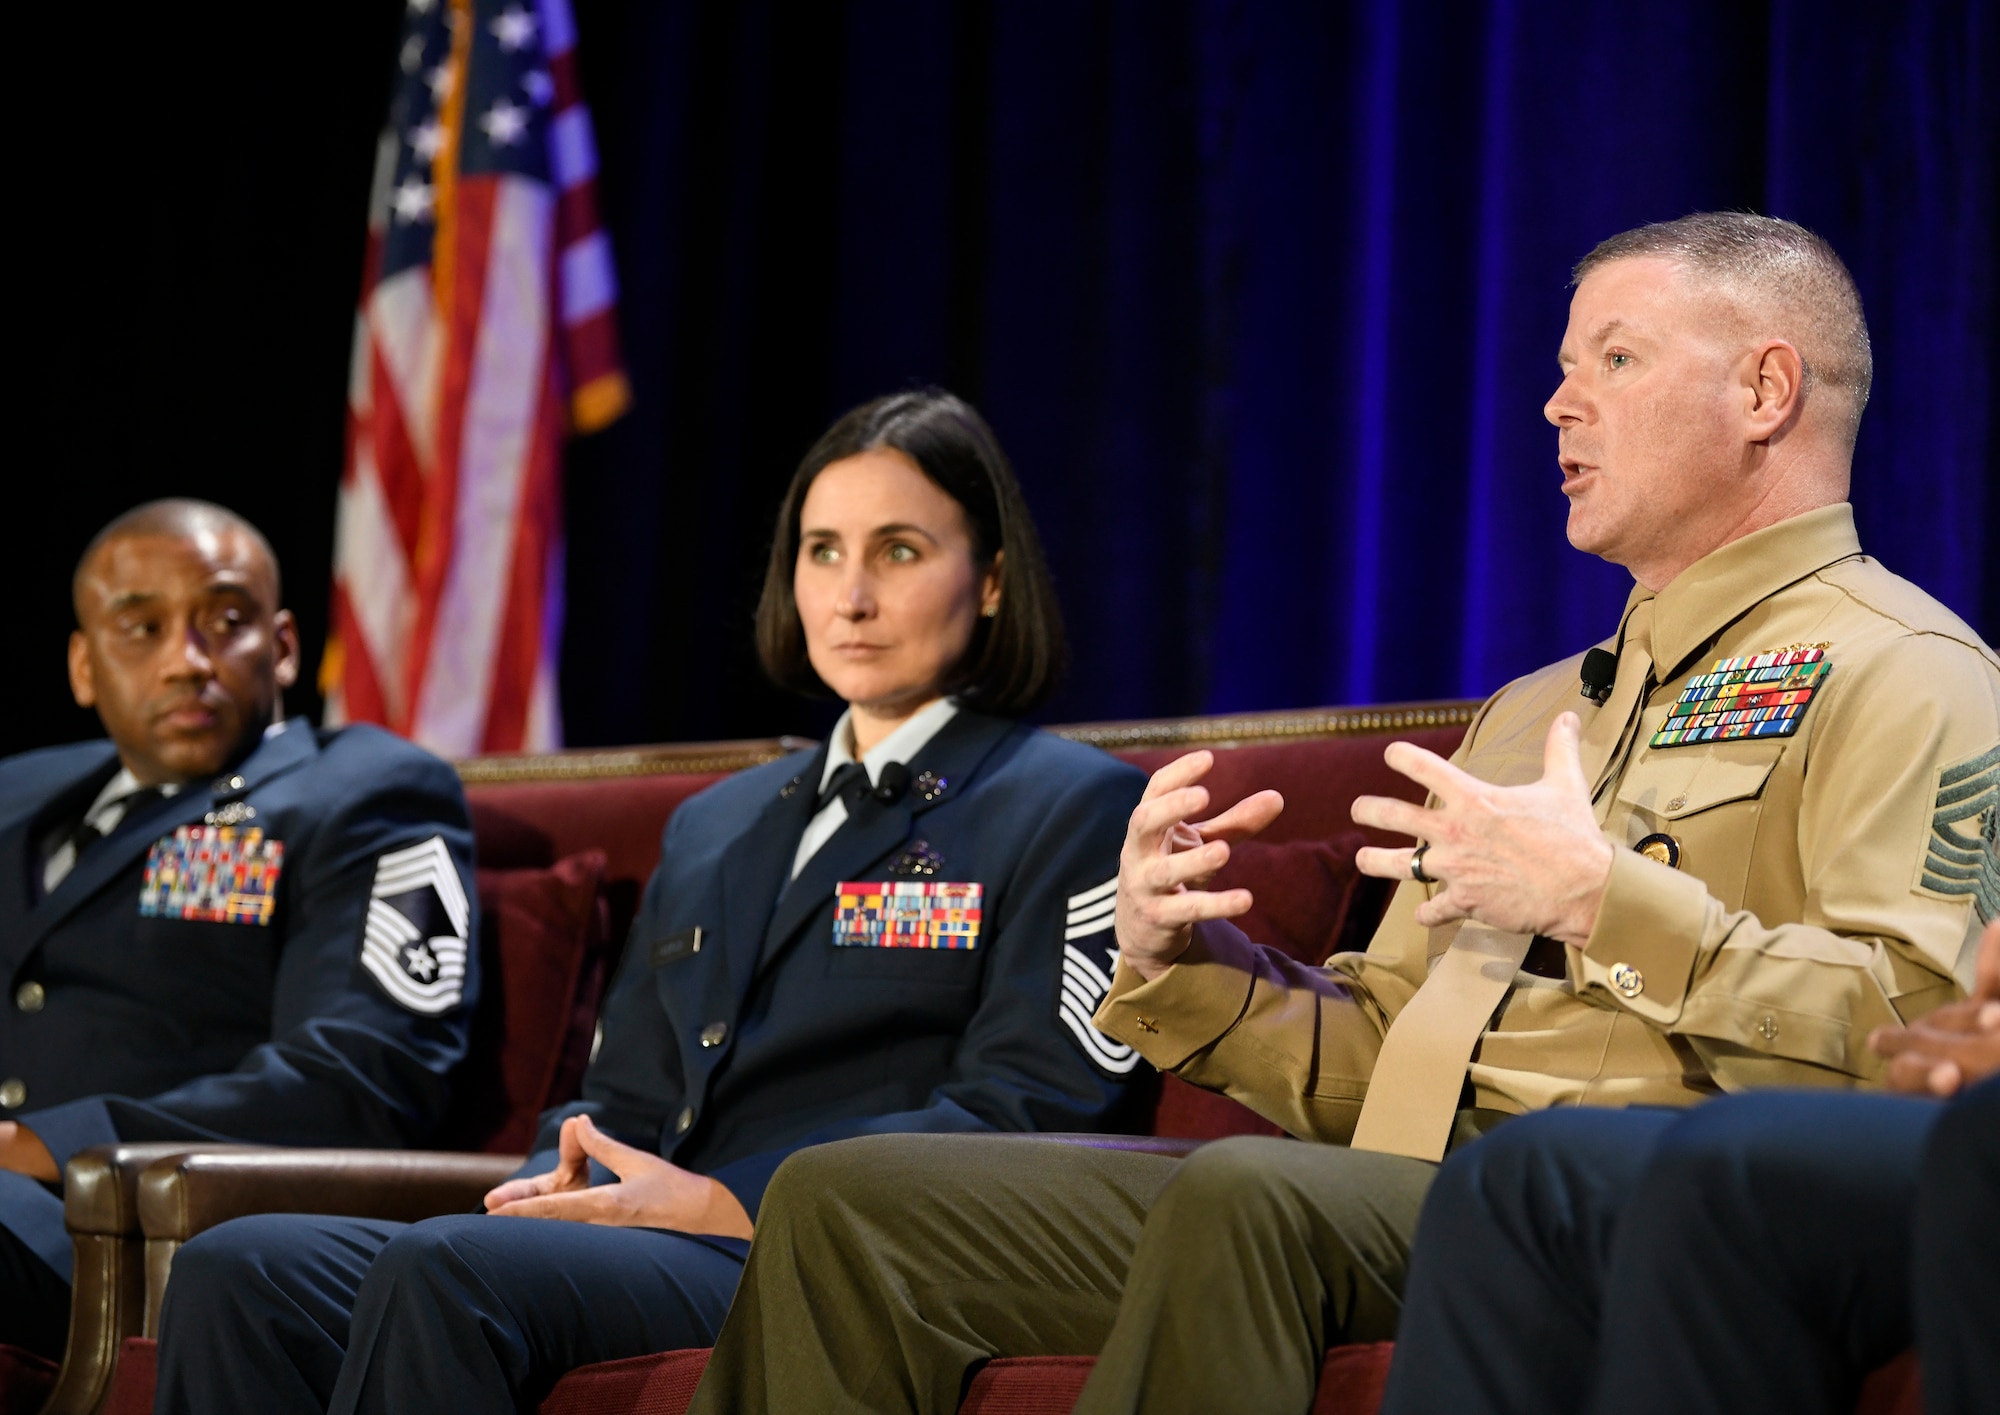 U.S. Marine Corps Master Gunnery Sgt. Scott Stalker, command senior enlisted leader of U.S. Cyber Command (right), speaks to Alamo Armed Forces Communication and Engineering Association Chapter Event attendees in San Antonio, Texas, Nov. 20, 2019, as (left to right) U.S. Air Force Chief Master Sgt. Harold Terrance, Jr., 33rd Network Warfare Squadron superintendent, and U.S. Air Force Chief Master Sgt. Summer Leifer, Sixteenth Air Force command chief, listen in. The three sat on an SEL panel during the annual cyber- and technology-focused conference to discuss cyber enlisted matters. (U.S. Air Force photo by Tech. Sgt. R.J. Biermann)